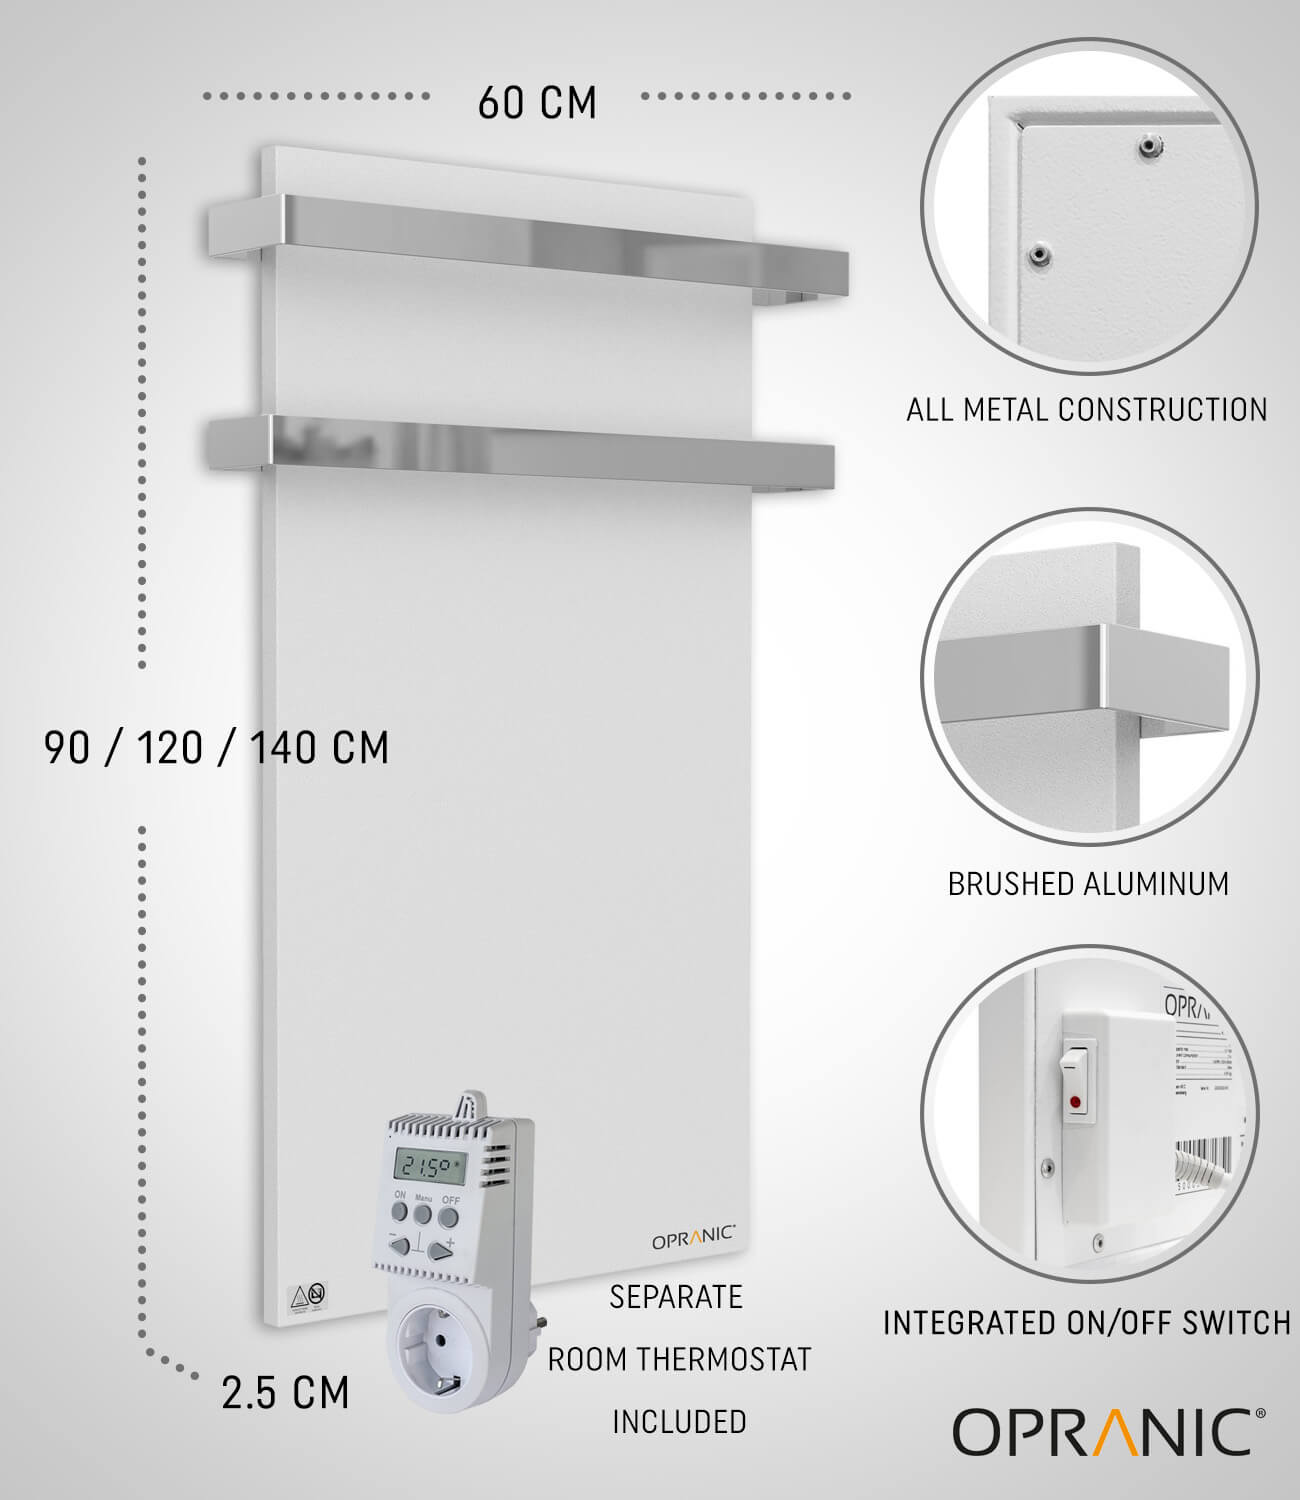 OPRANIC P5, Metal 700W, Infrared Bathroom Panel Heater with Towel Holder and OT50 Thermostat